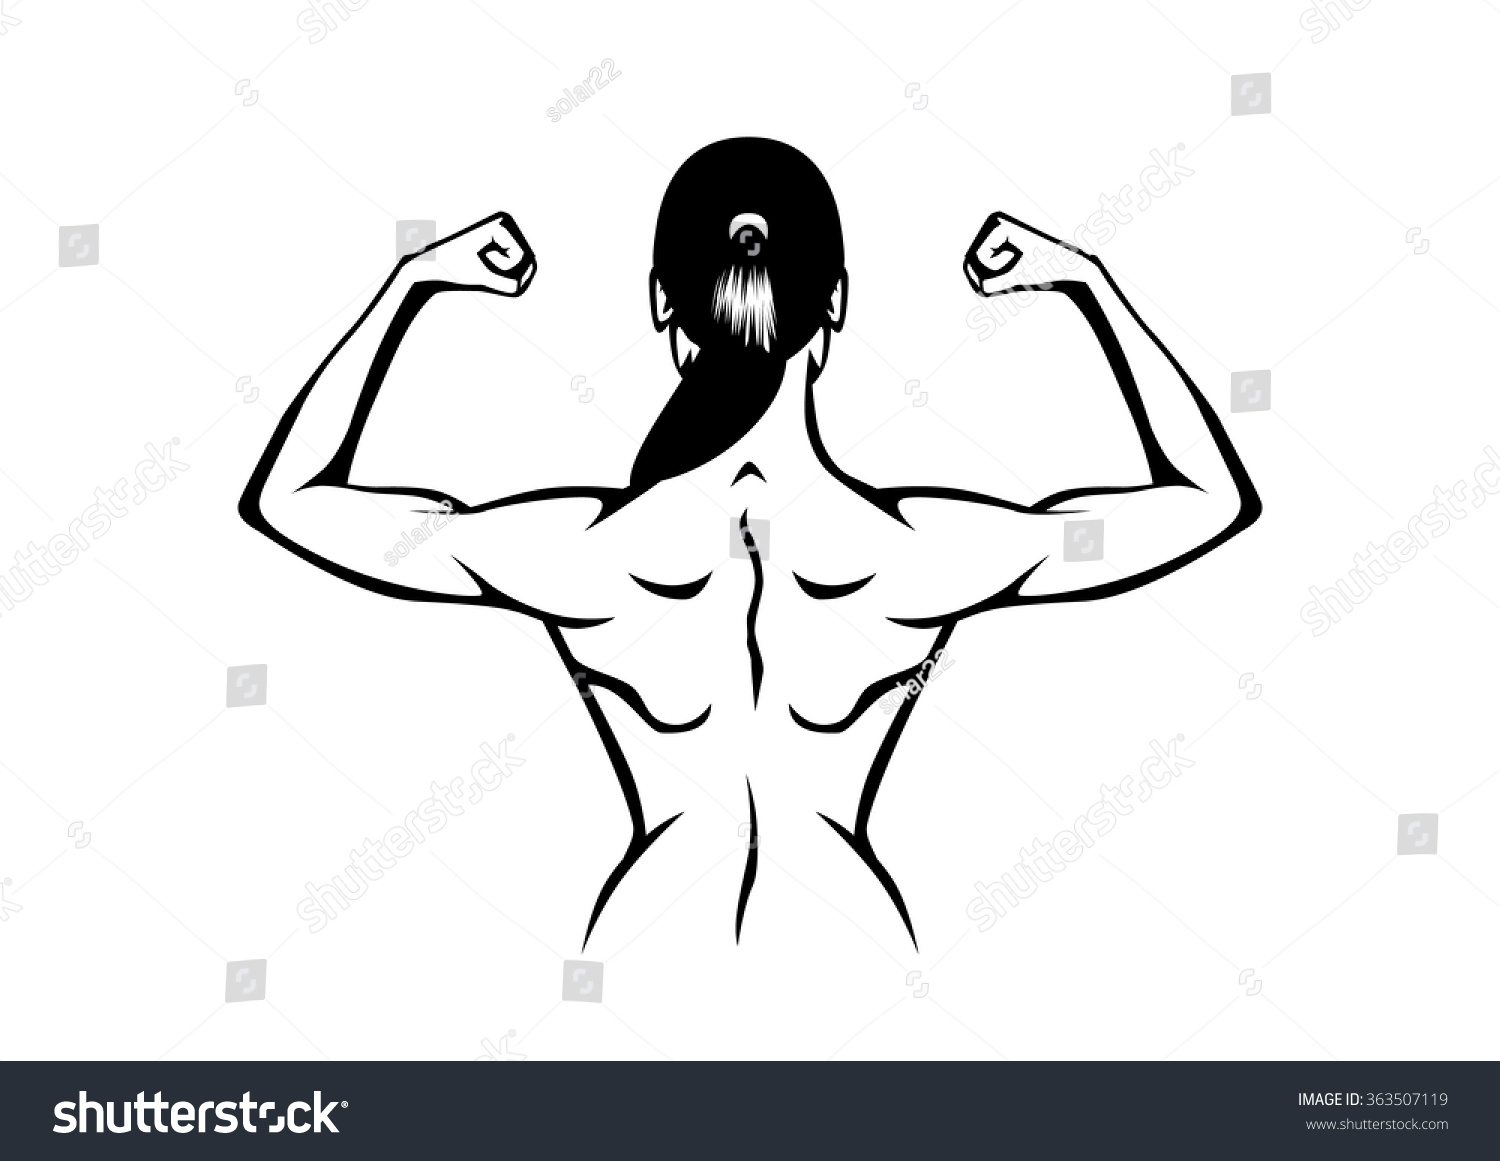 Download Healthy Woman Taking Off His Shirt Stock Vector 363507119 ...